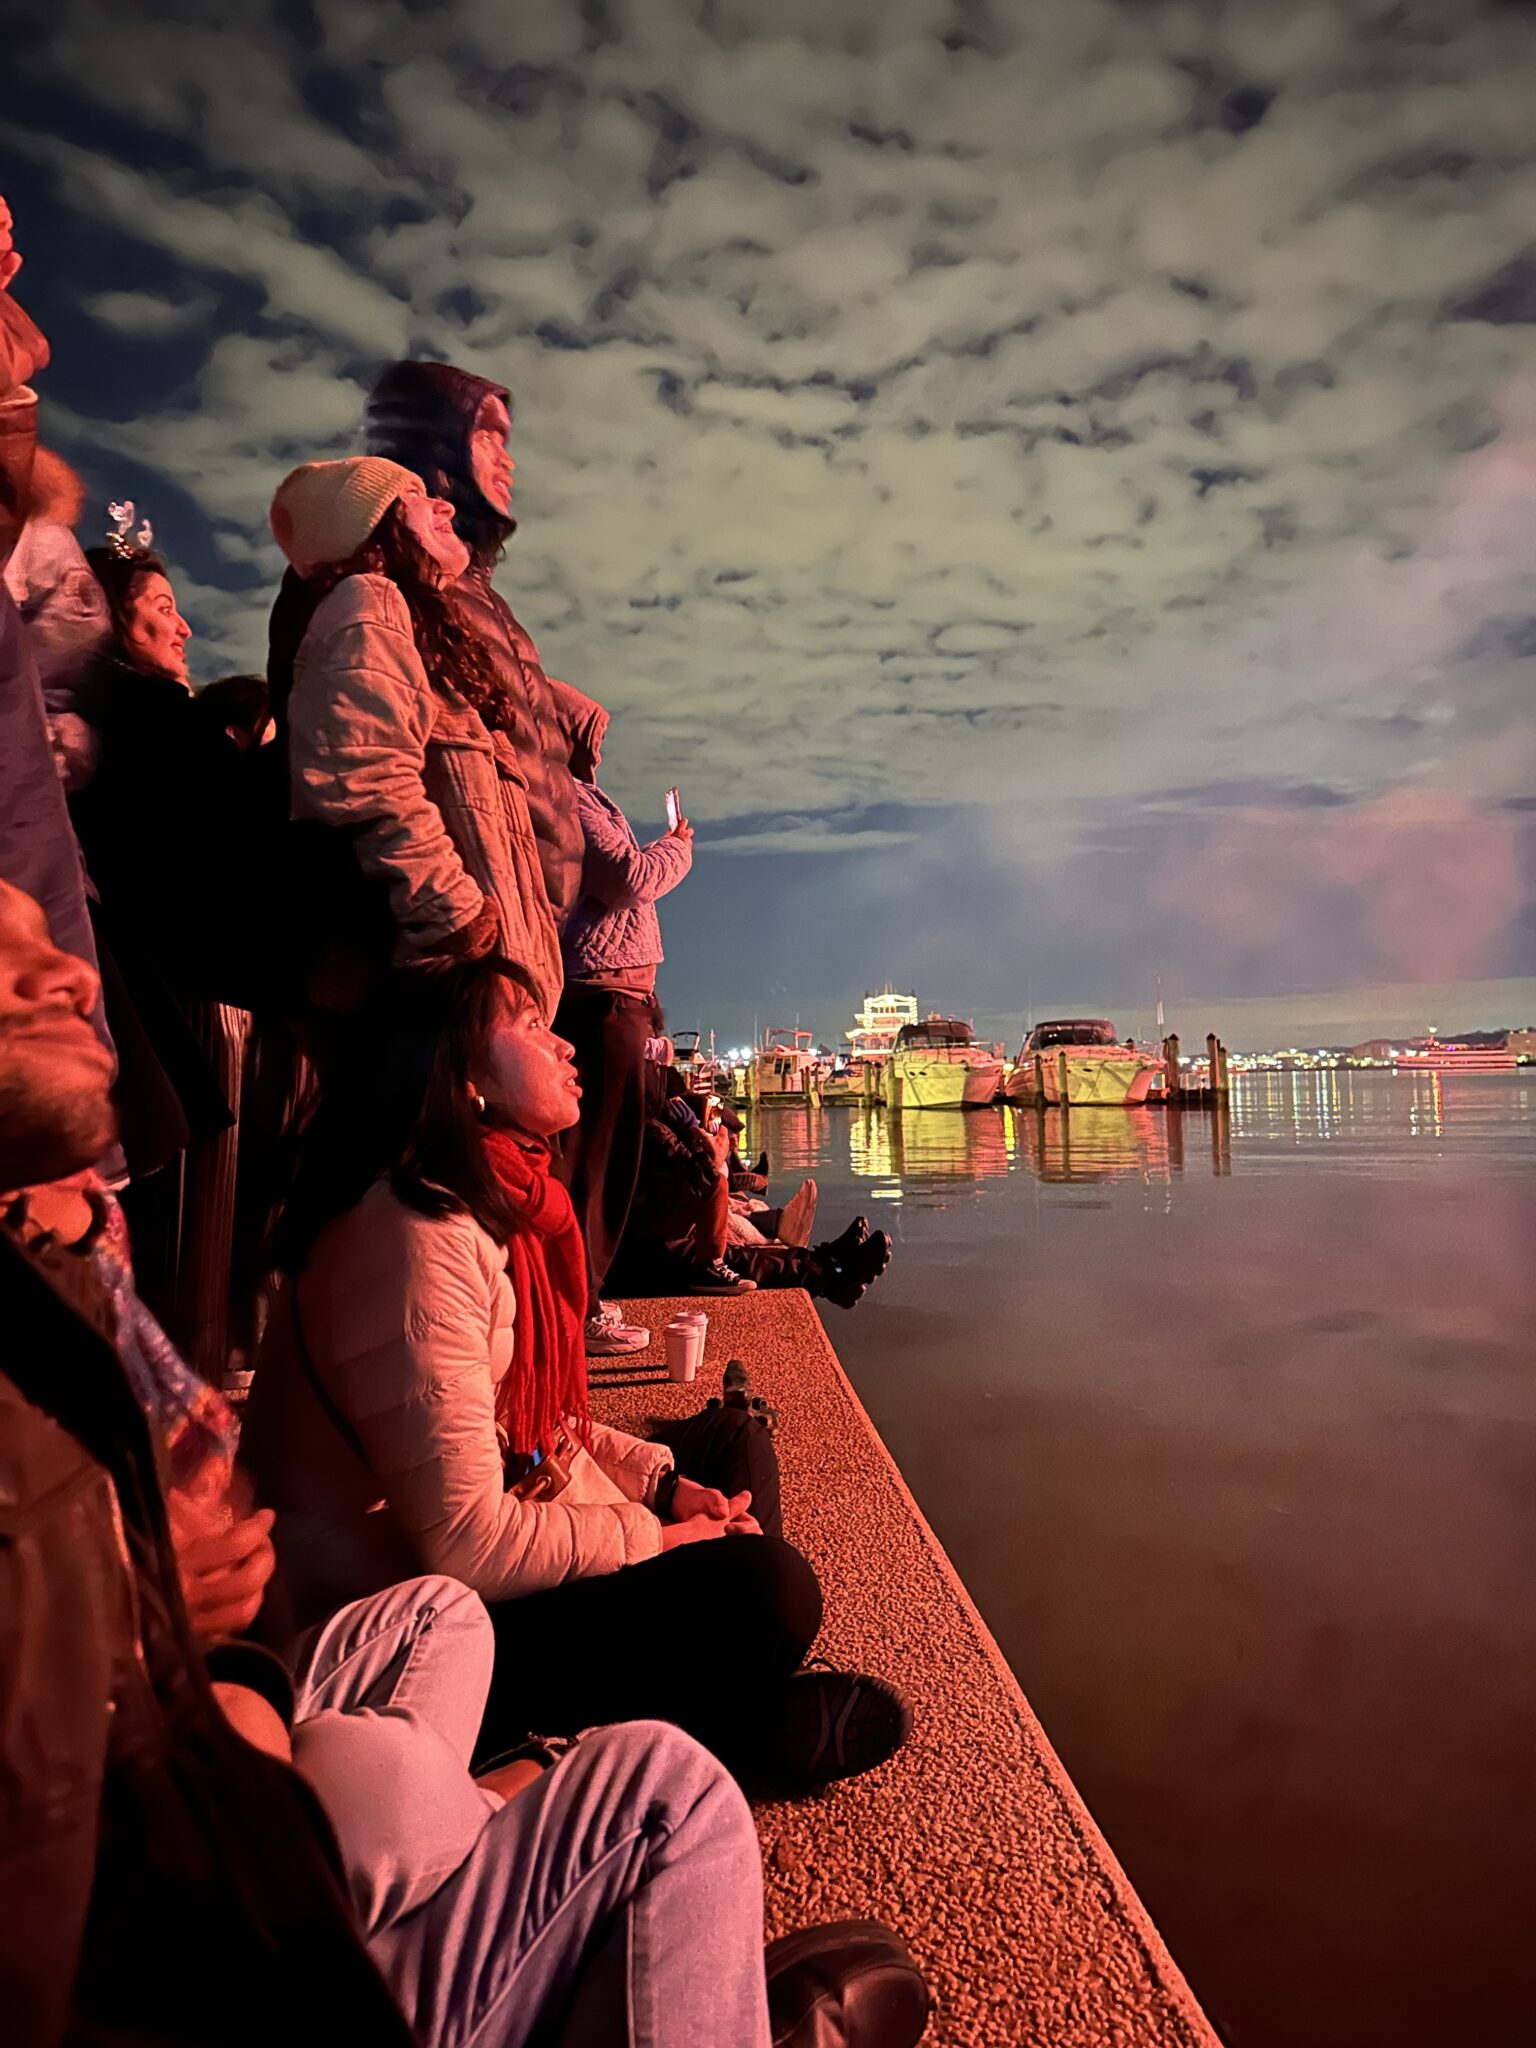 Profile of people watching fireworks with sky in background and water in foreground.